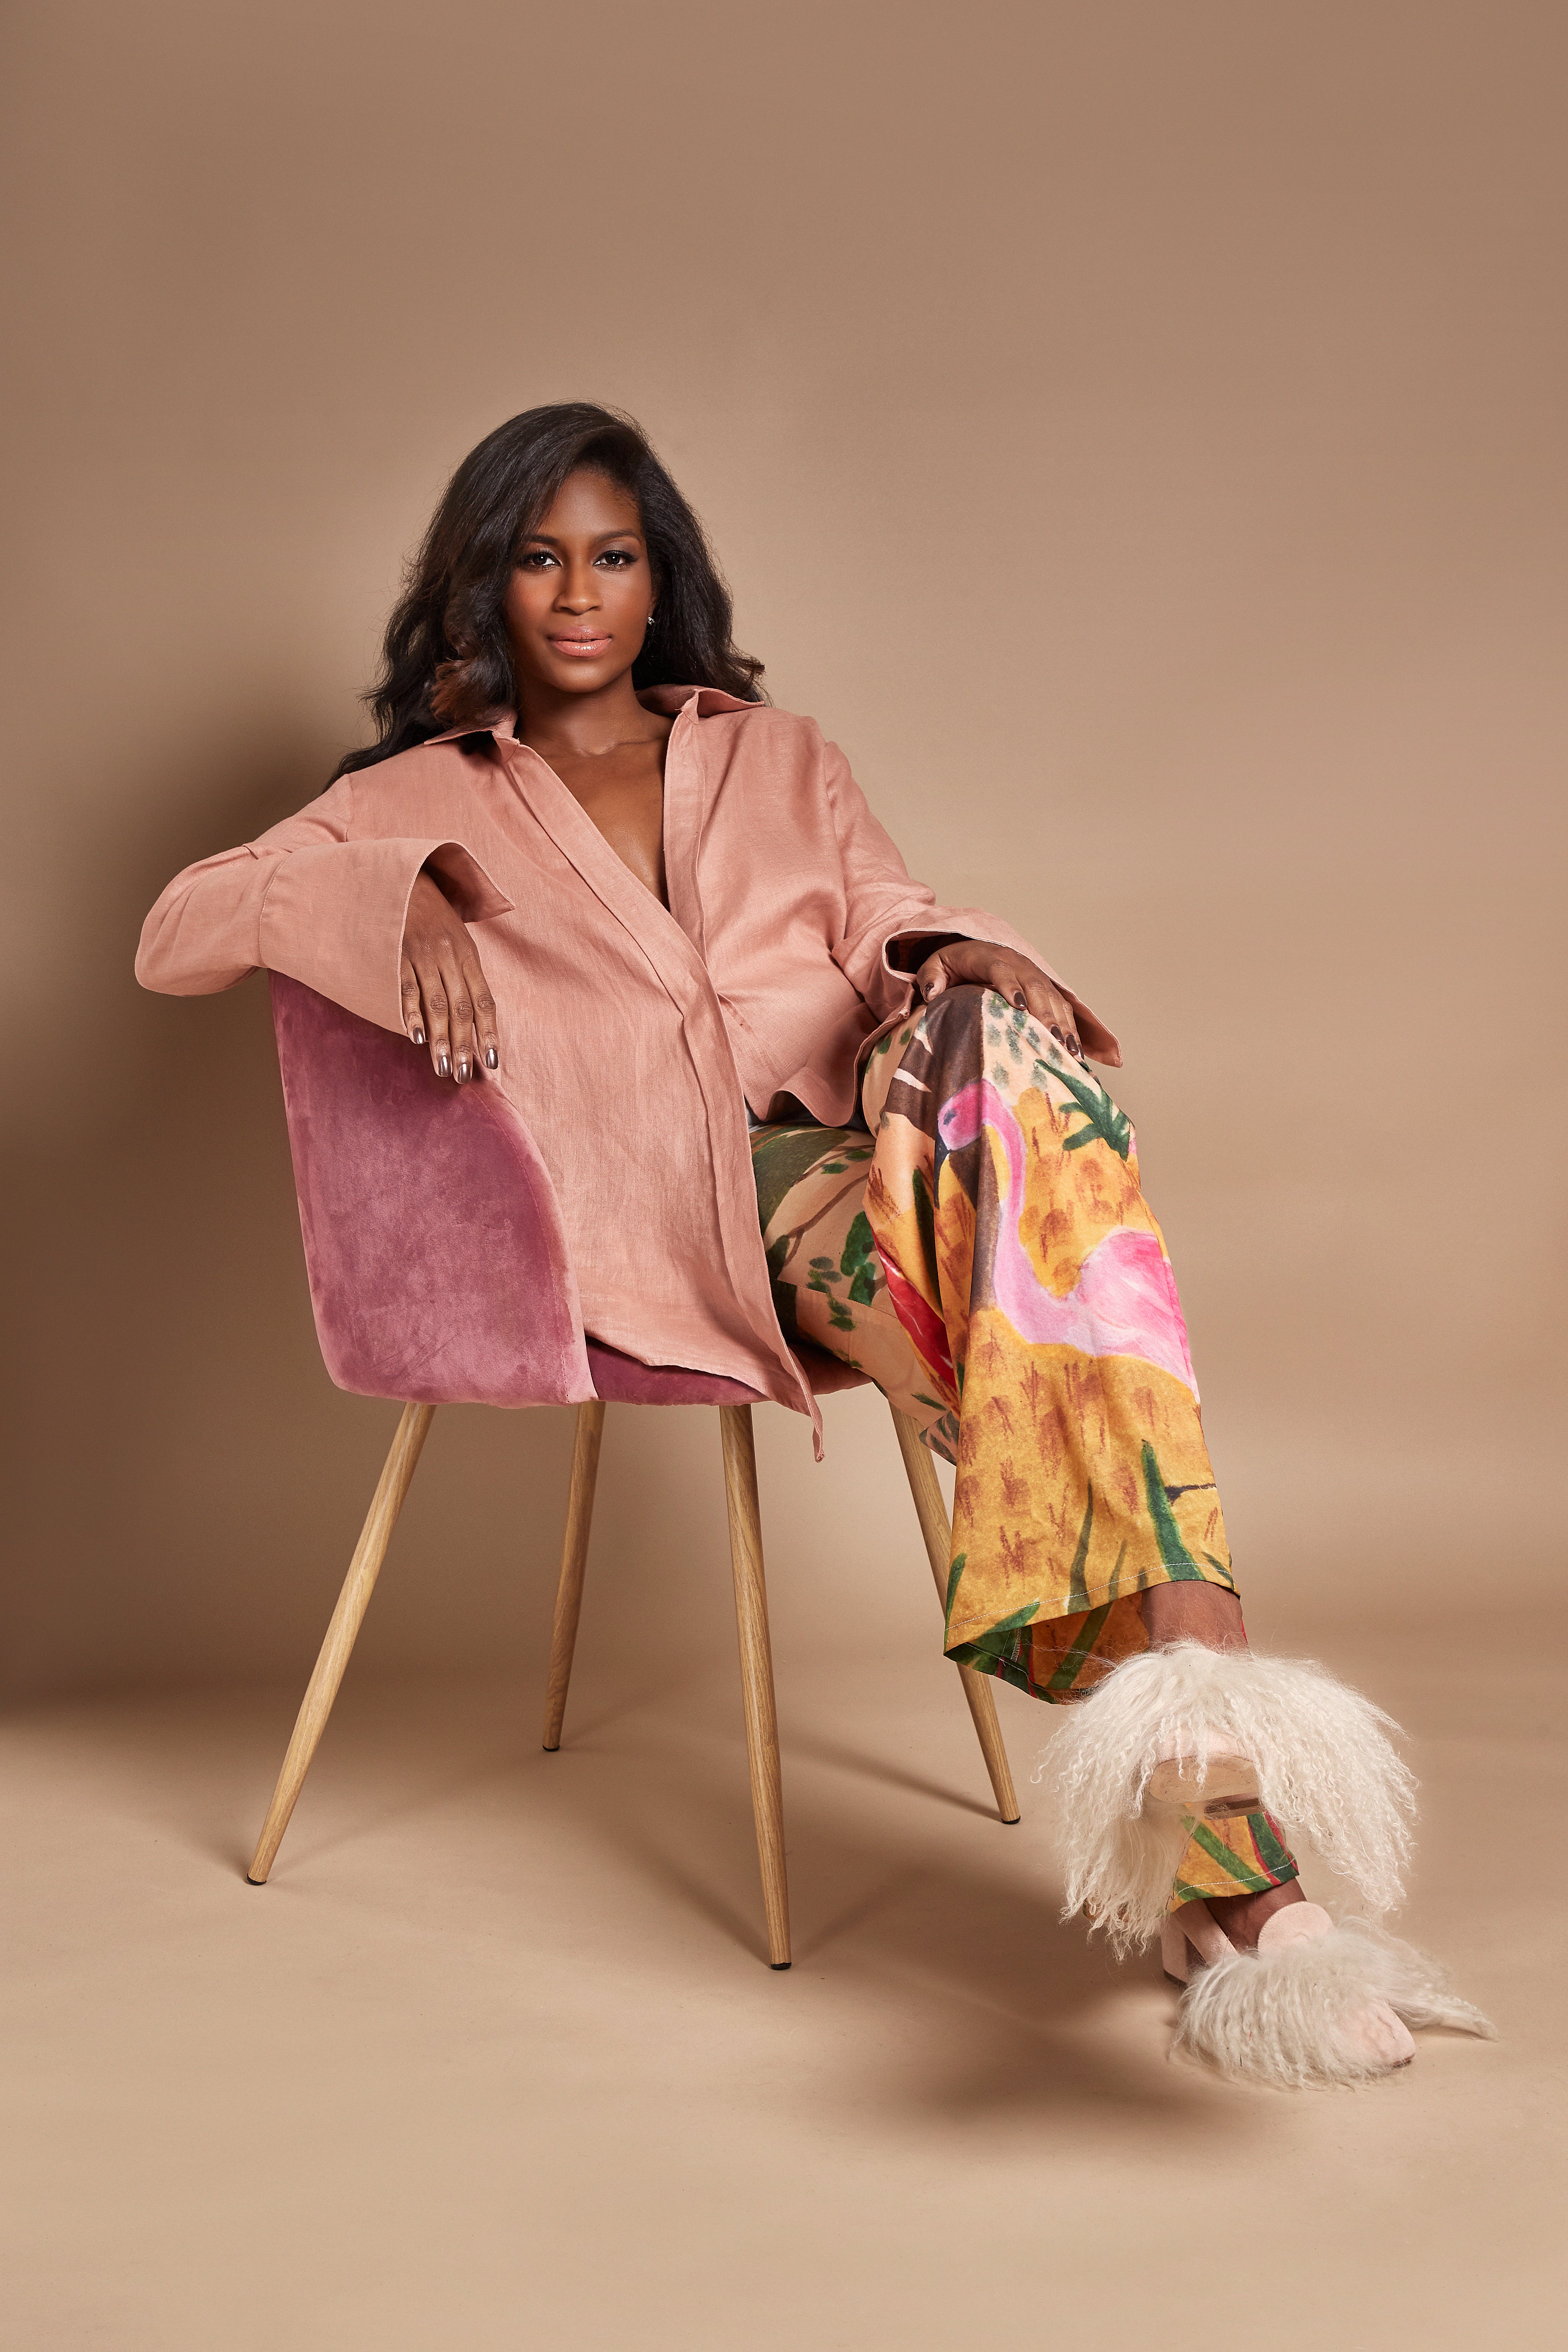 ESSENCE Best In Black Fashion Awards: Meet The 2019 Designer Of The Year Nominees